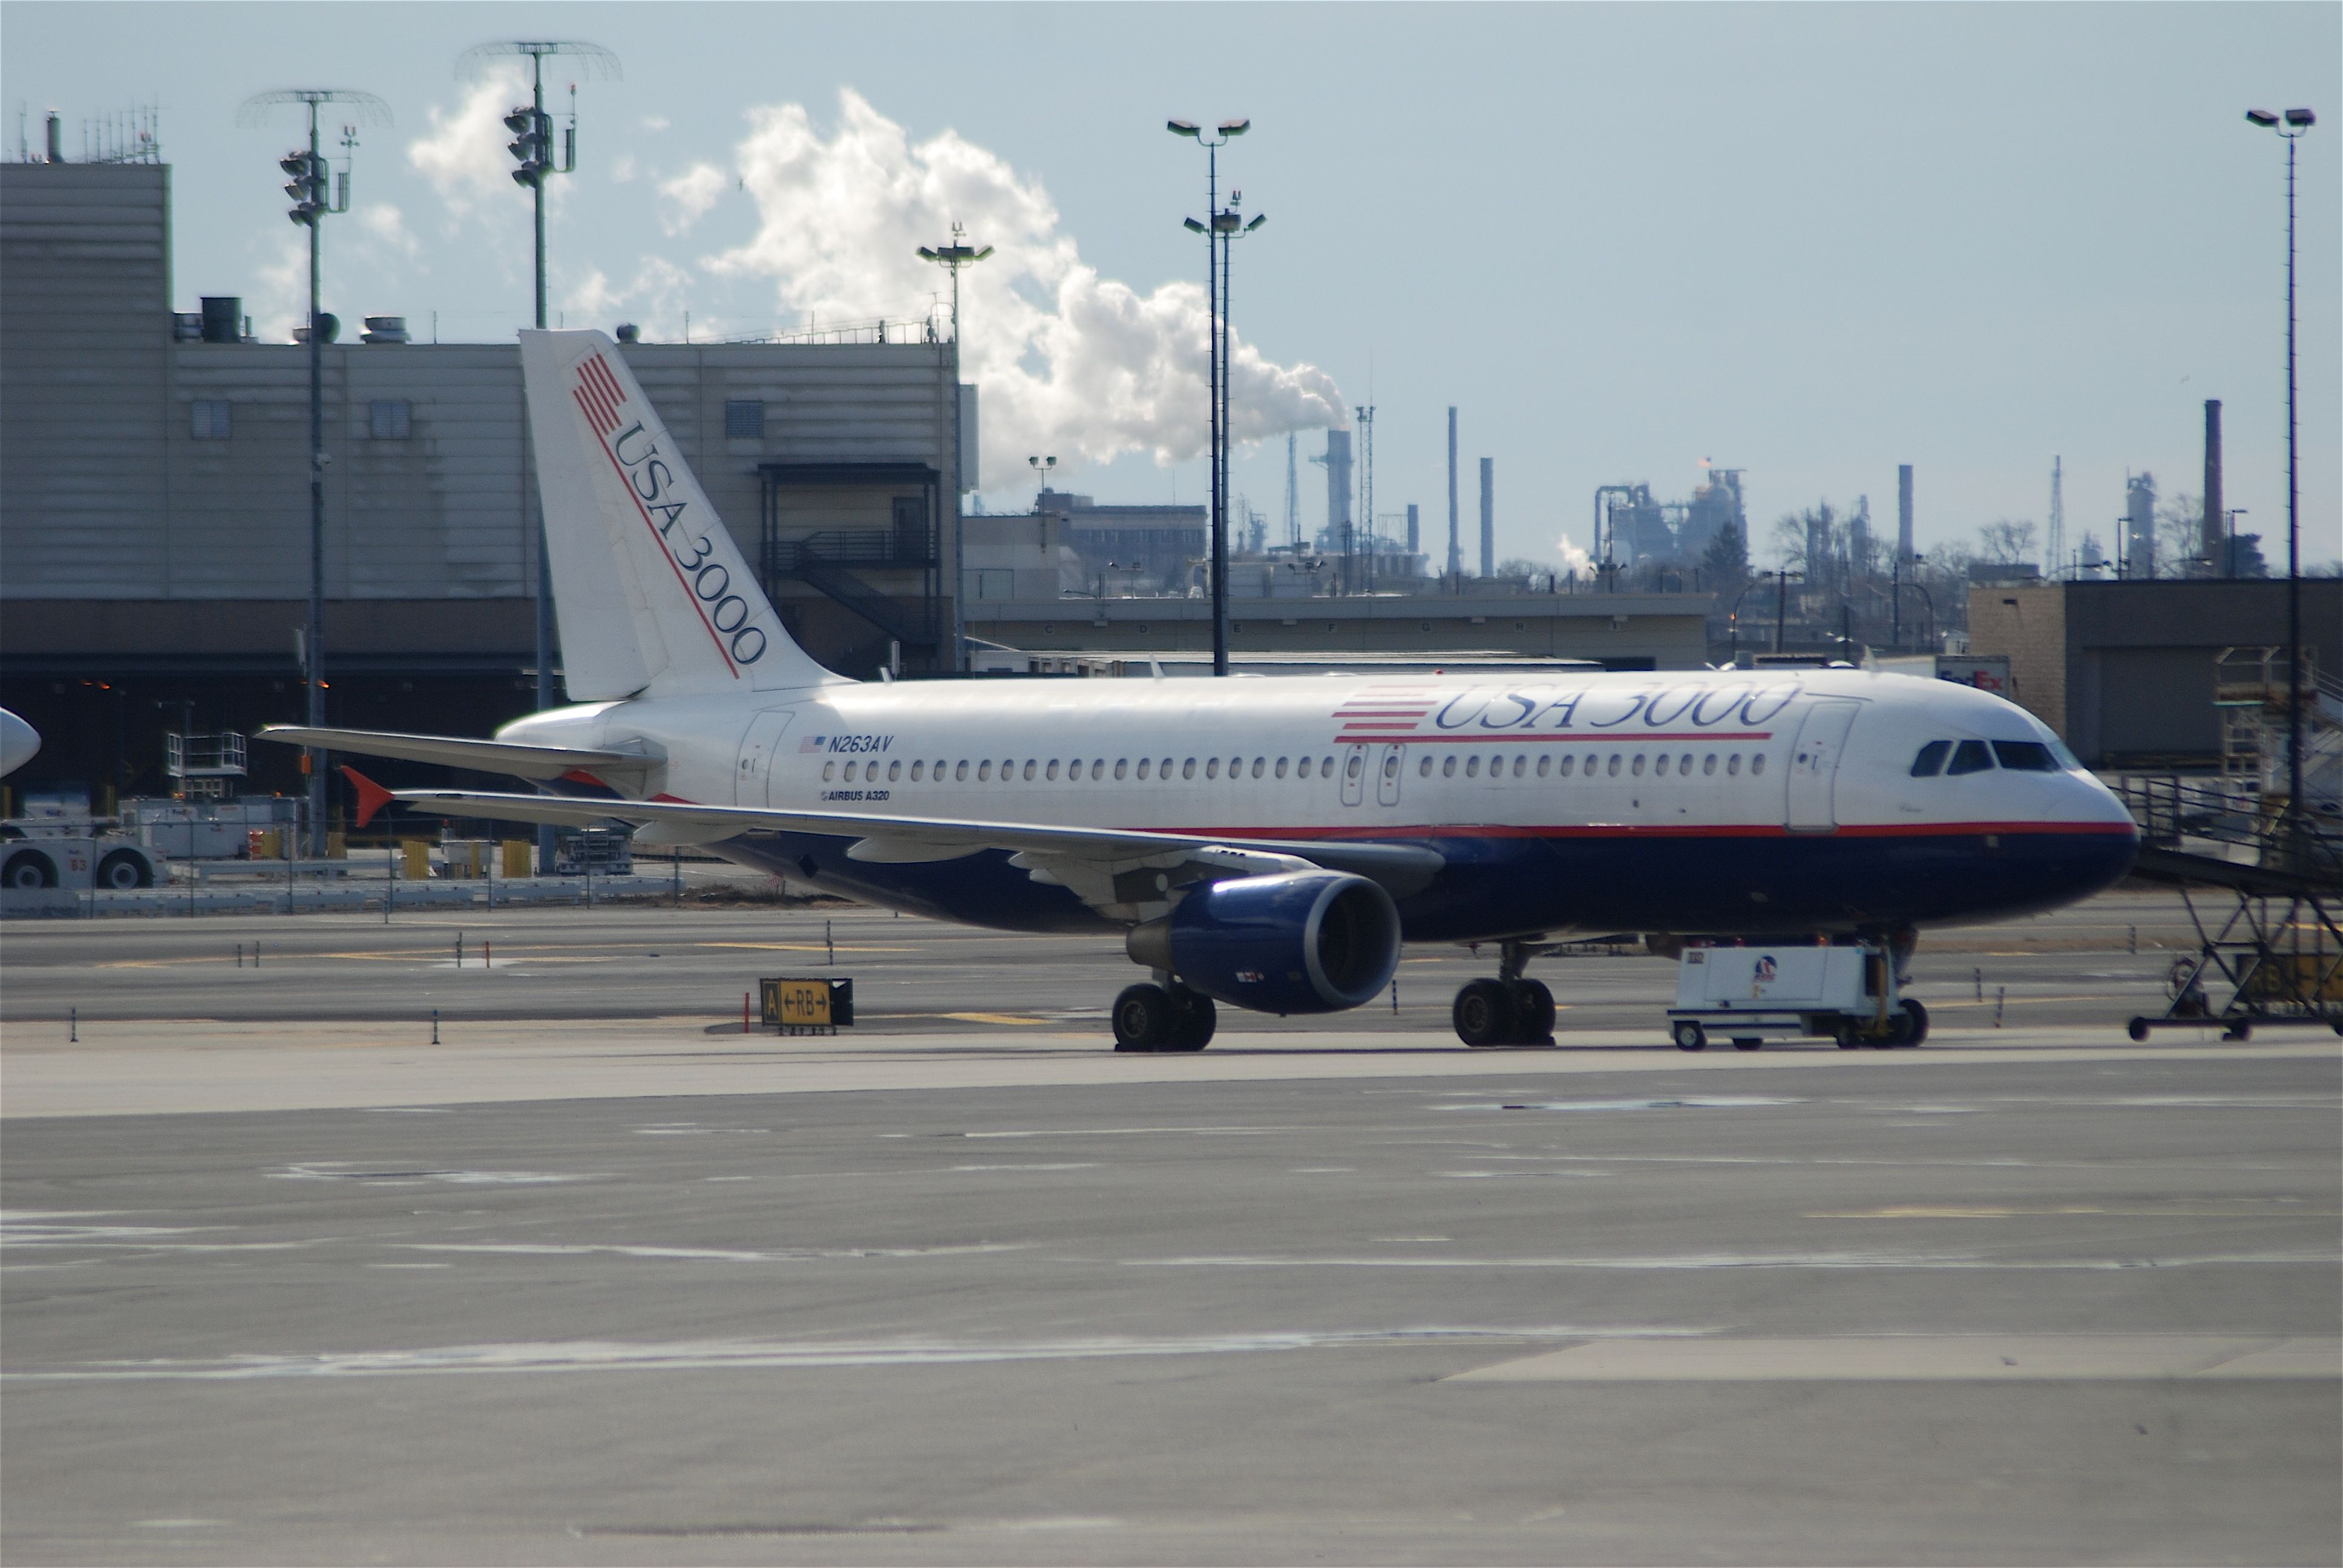 USA3000 Airlines Airbus A320 sitting idle at Newark airport.